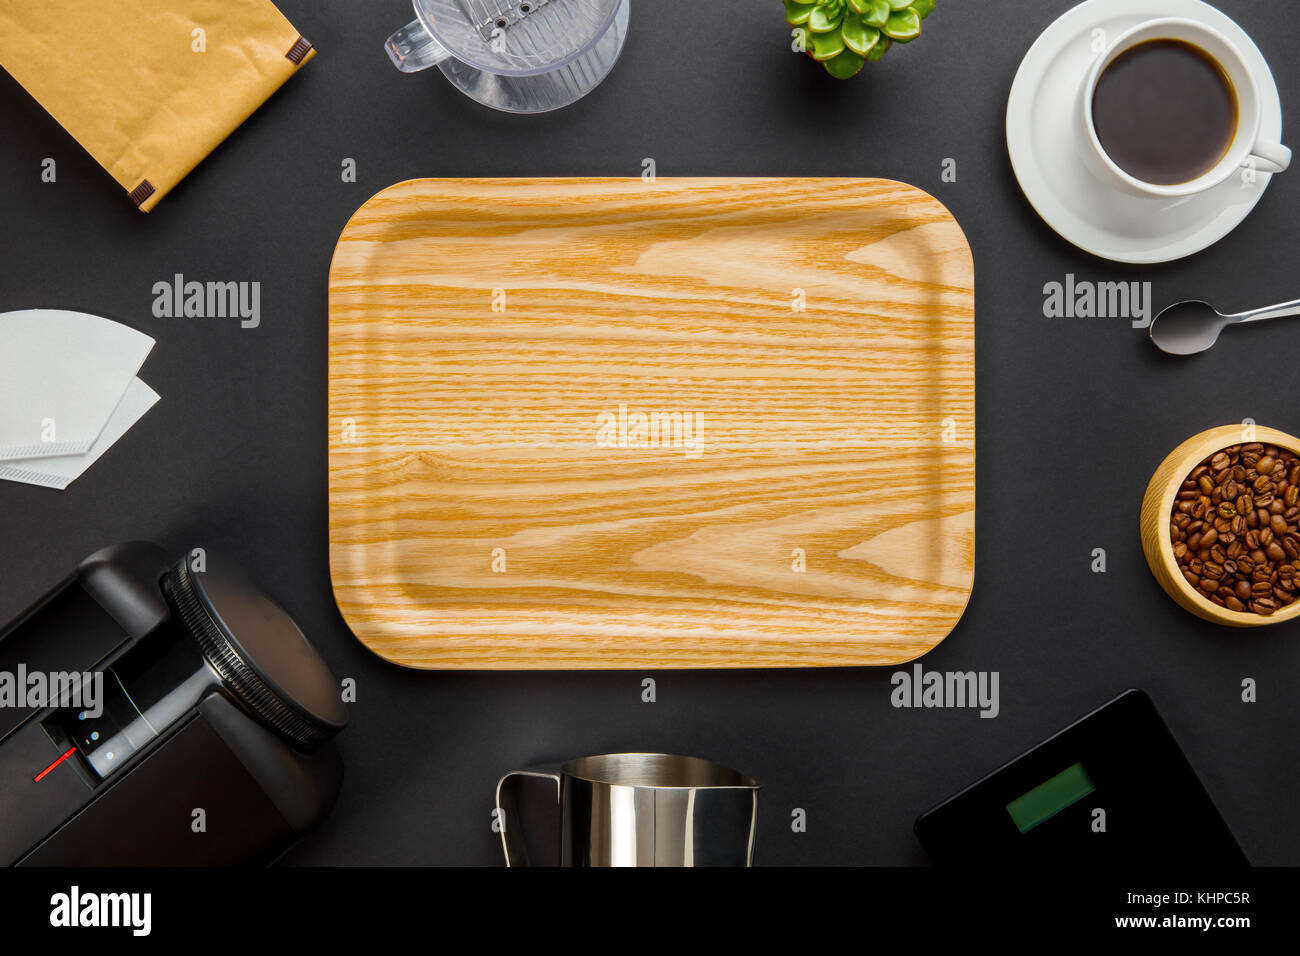 Wooden Tray Surrounded By Coffee Making Equipment On Gray Backgr Stock Photo